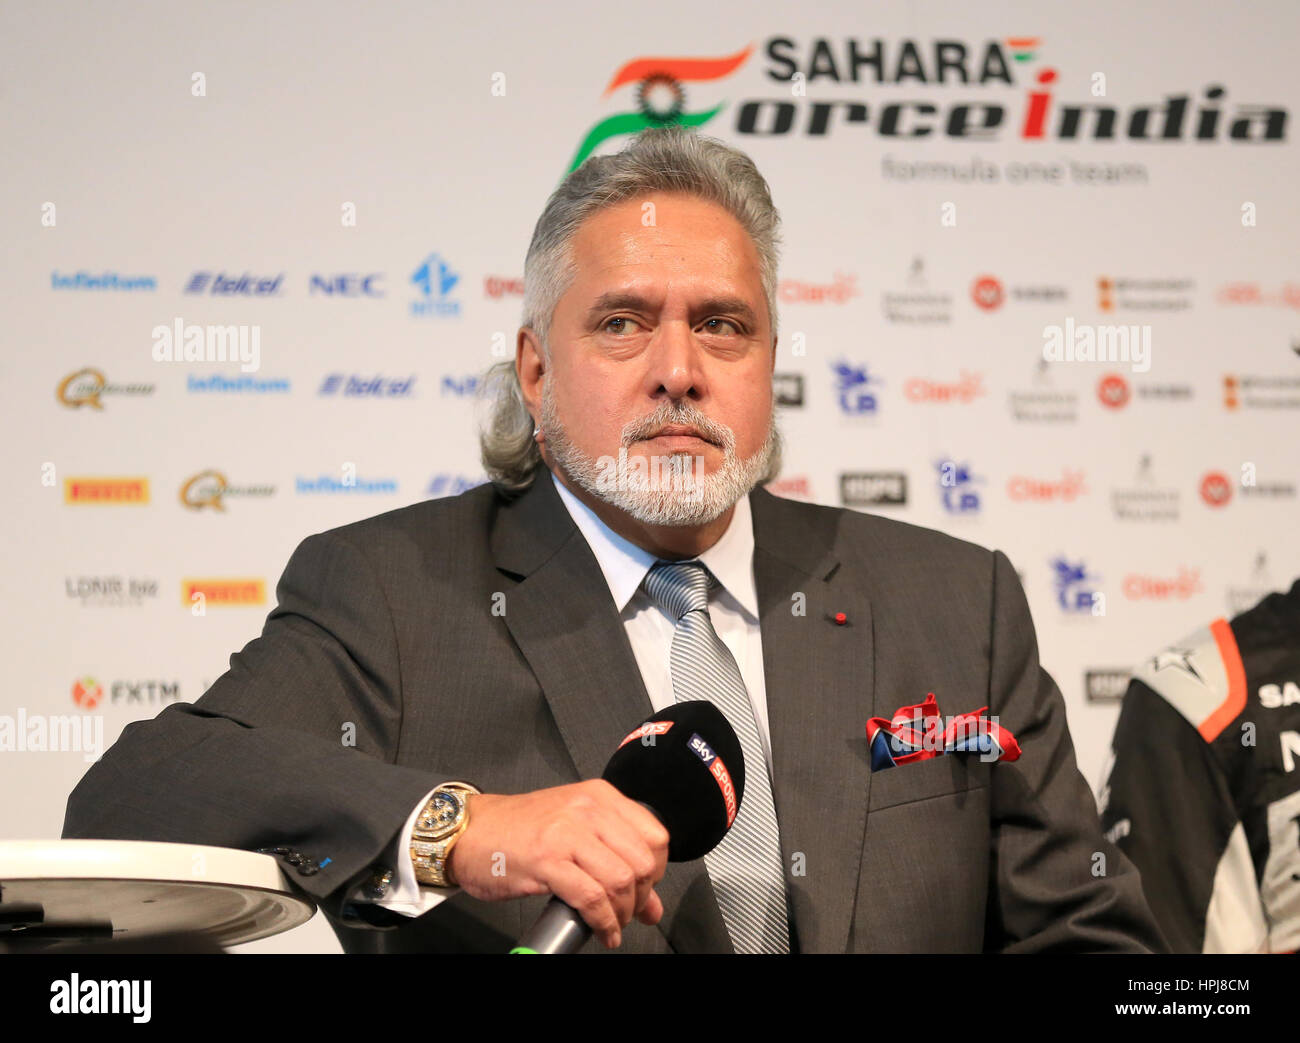 Sahara Force India F1 Team Owner Dr. Vijay Mallya during the Force India 2017 Car Launch at Silverstone, Towcester. Stock Photo